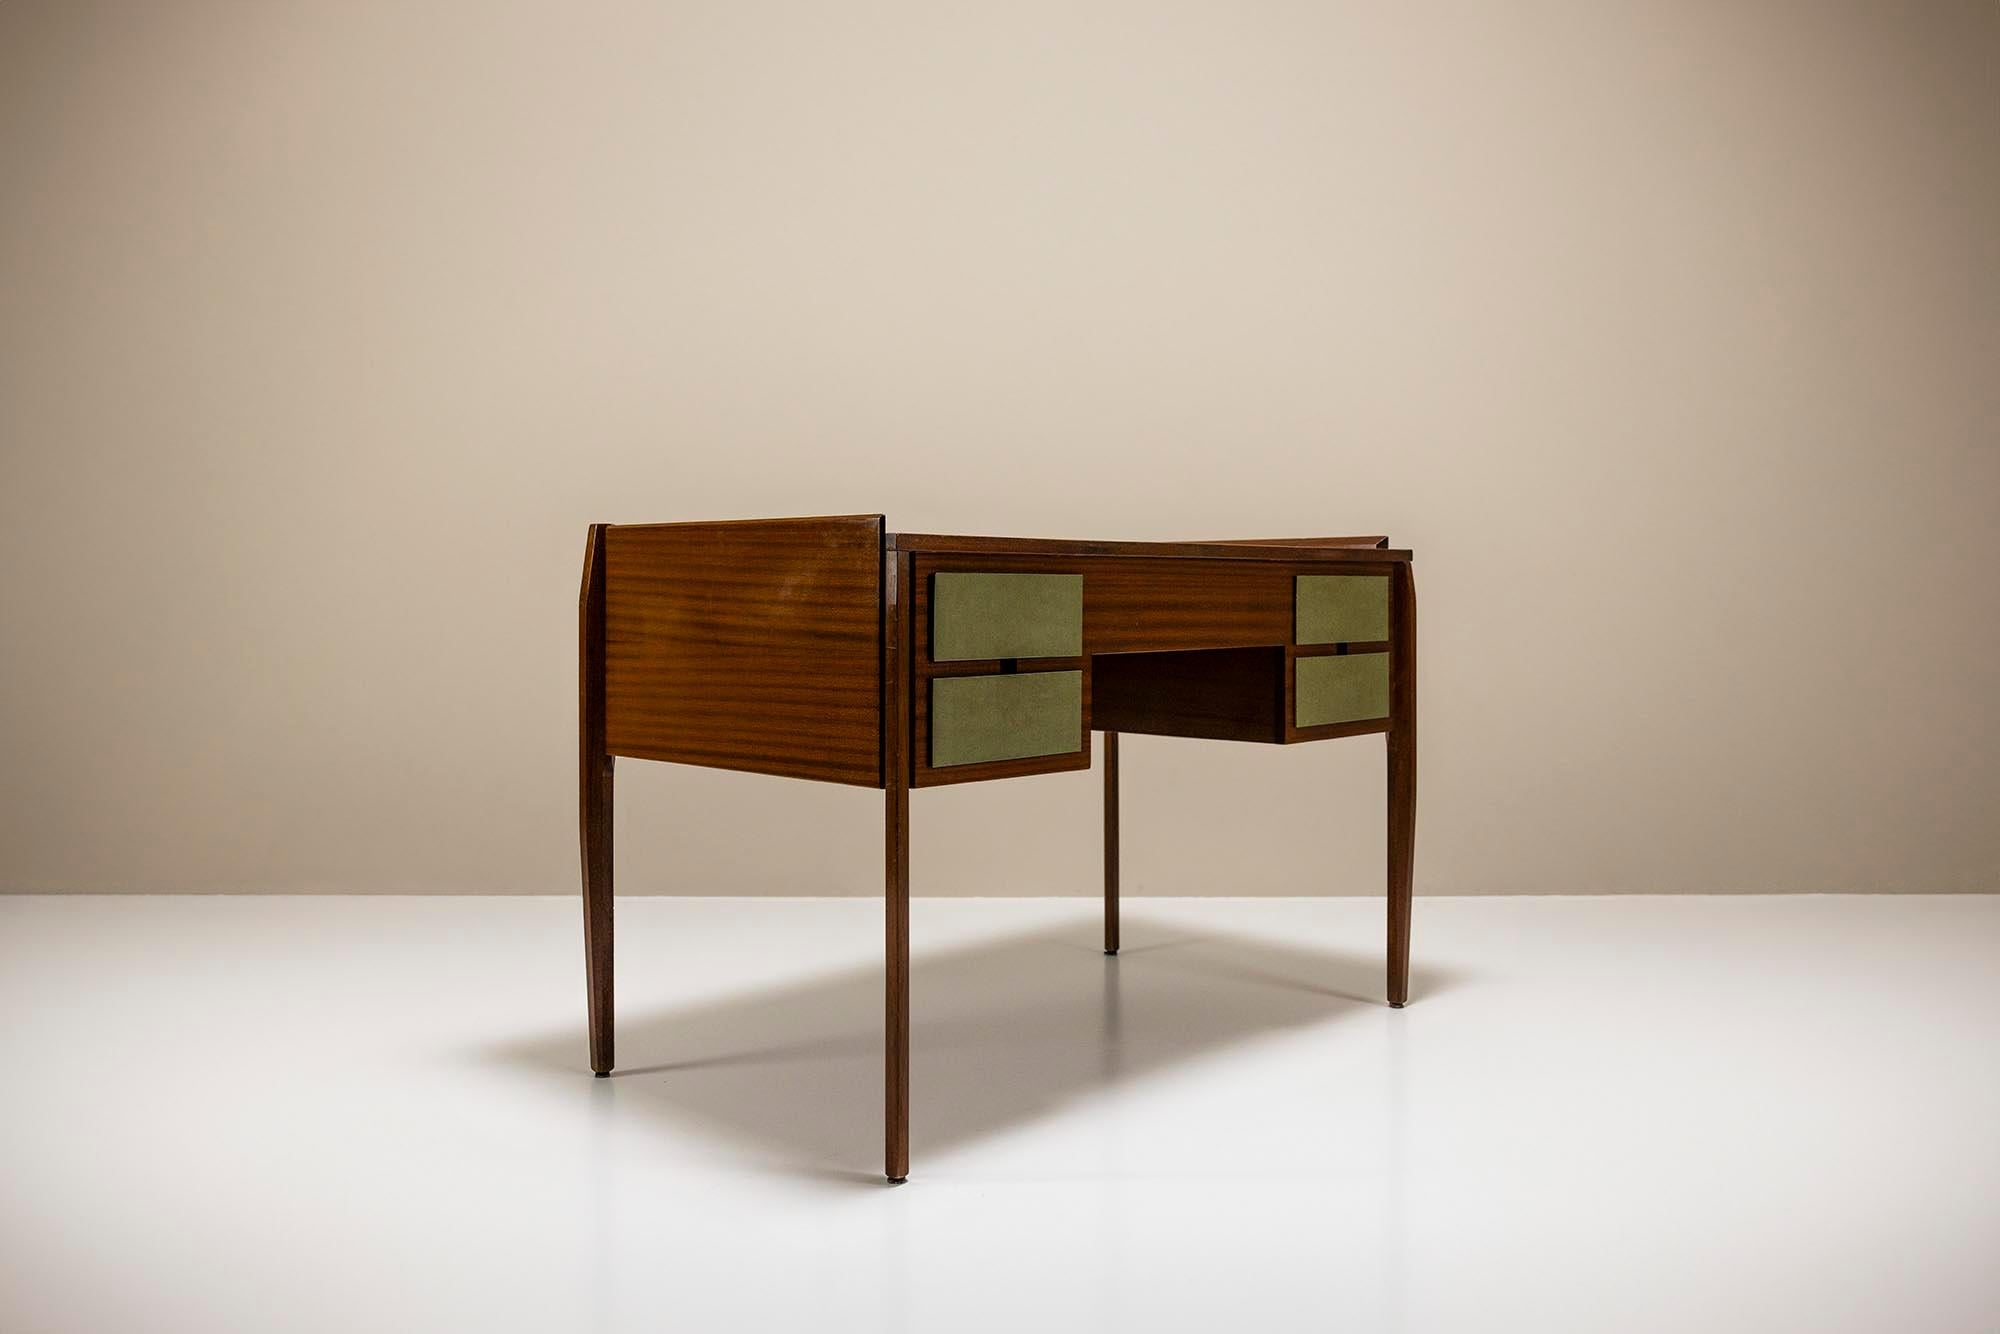 Mid-Century Modern Desk In Mahogany Veneer Attributed To Gio Ponti, Italy 1950's For Sale